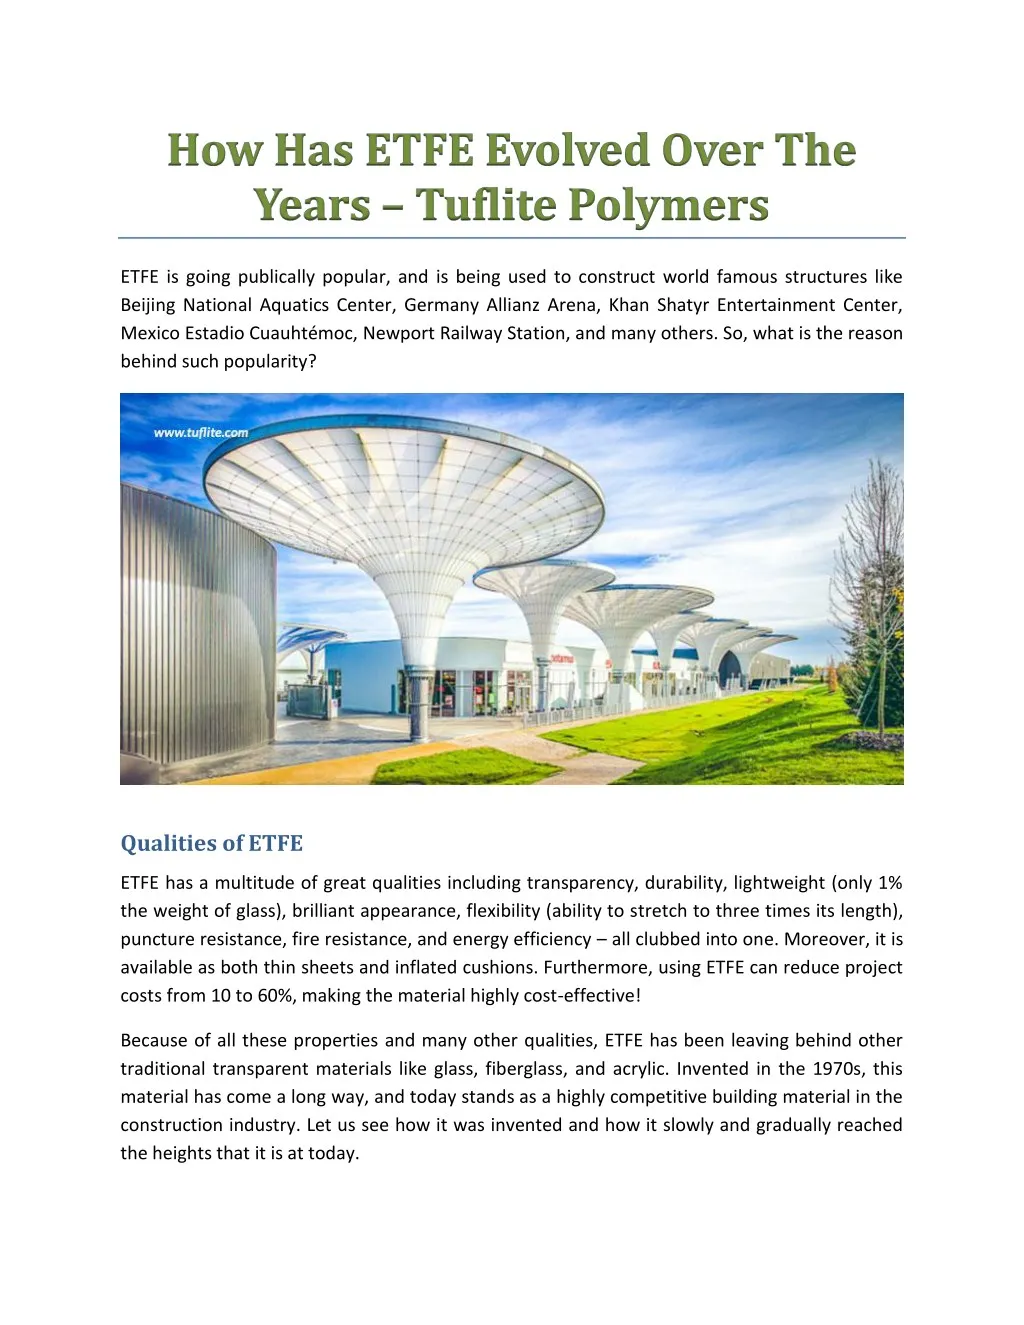 etfe is going publically popular and is being